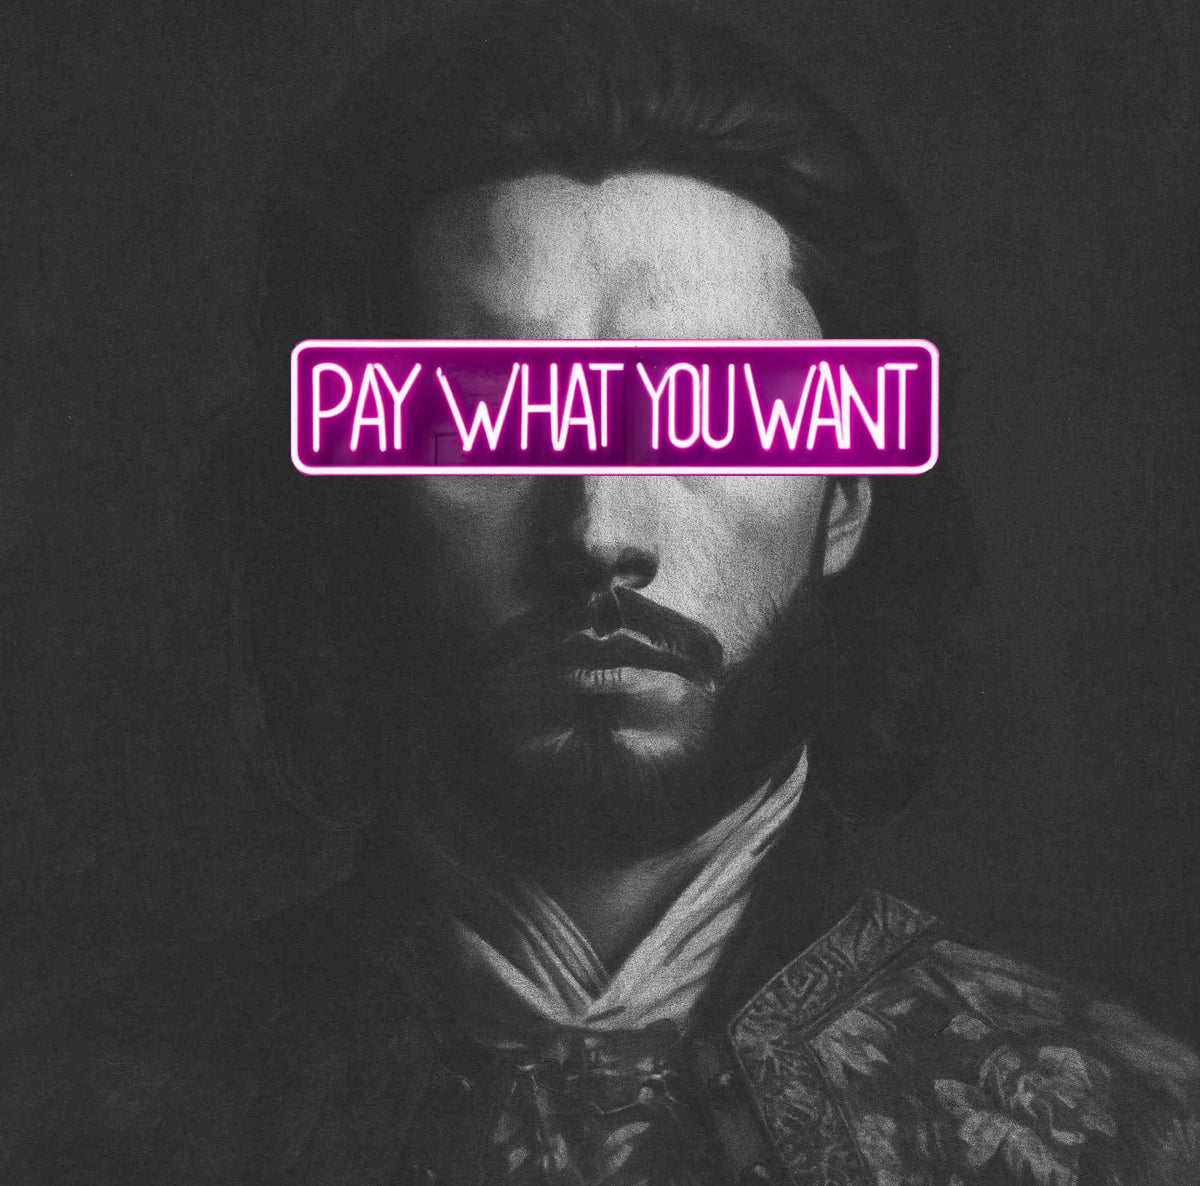 PAY WHAT YOU WANT Willem SJ Art Neon